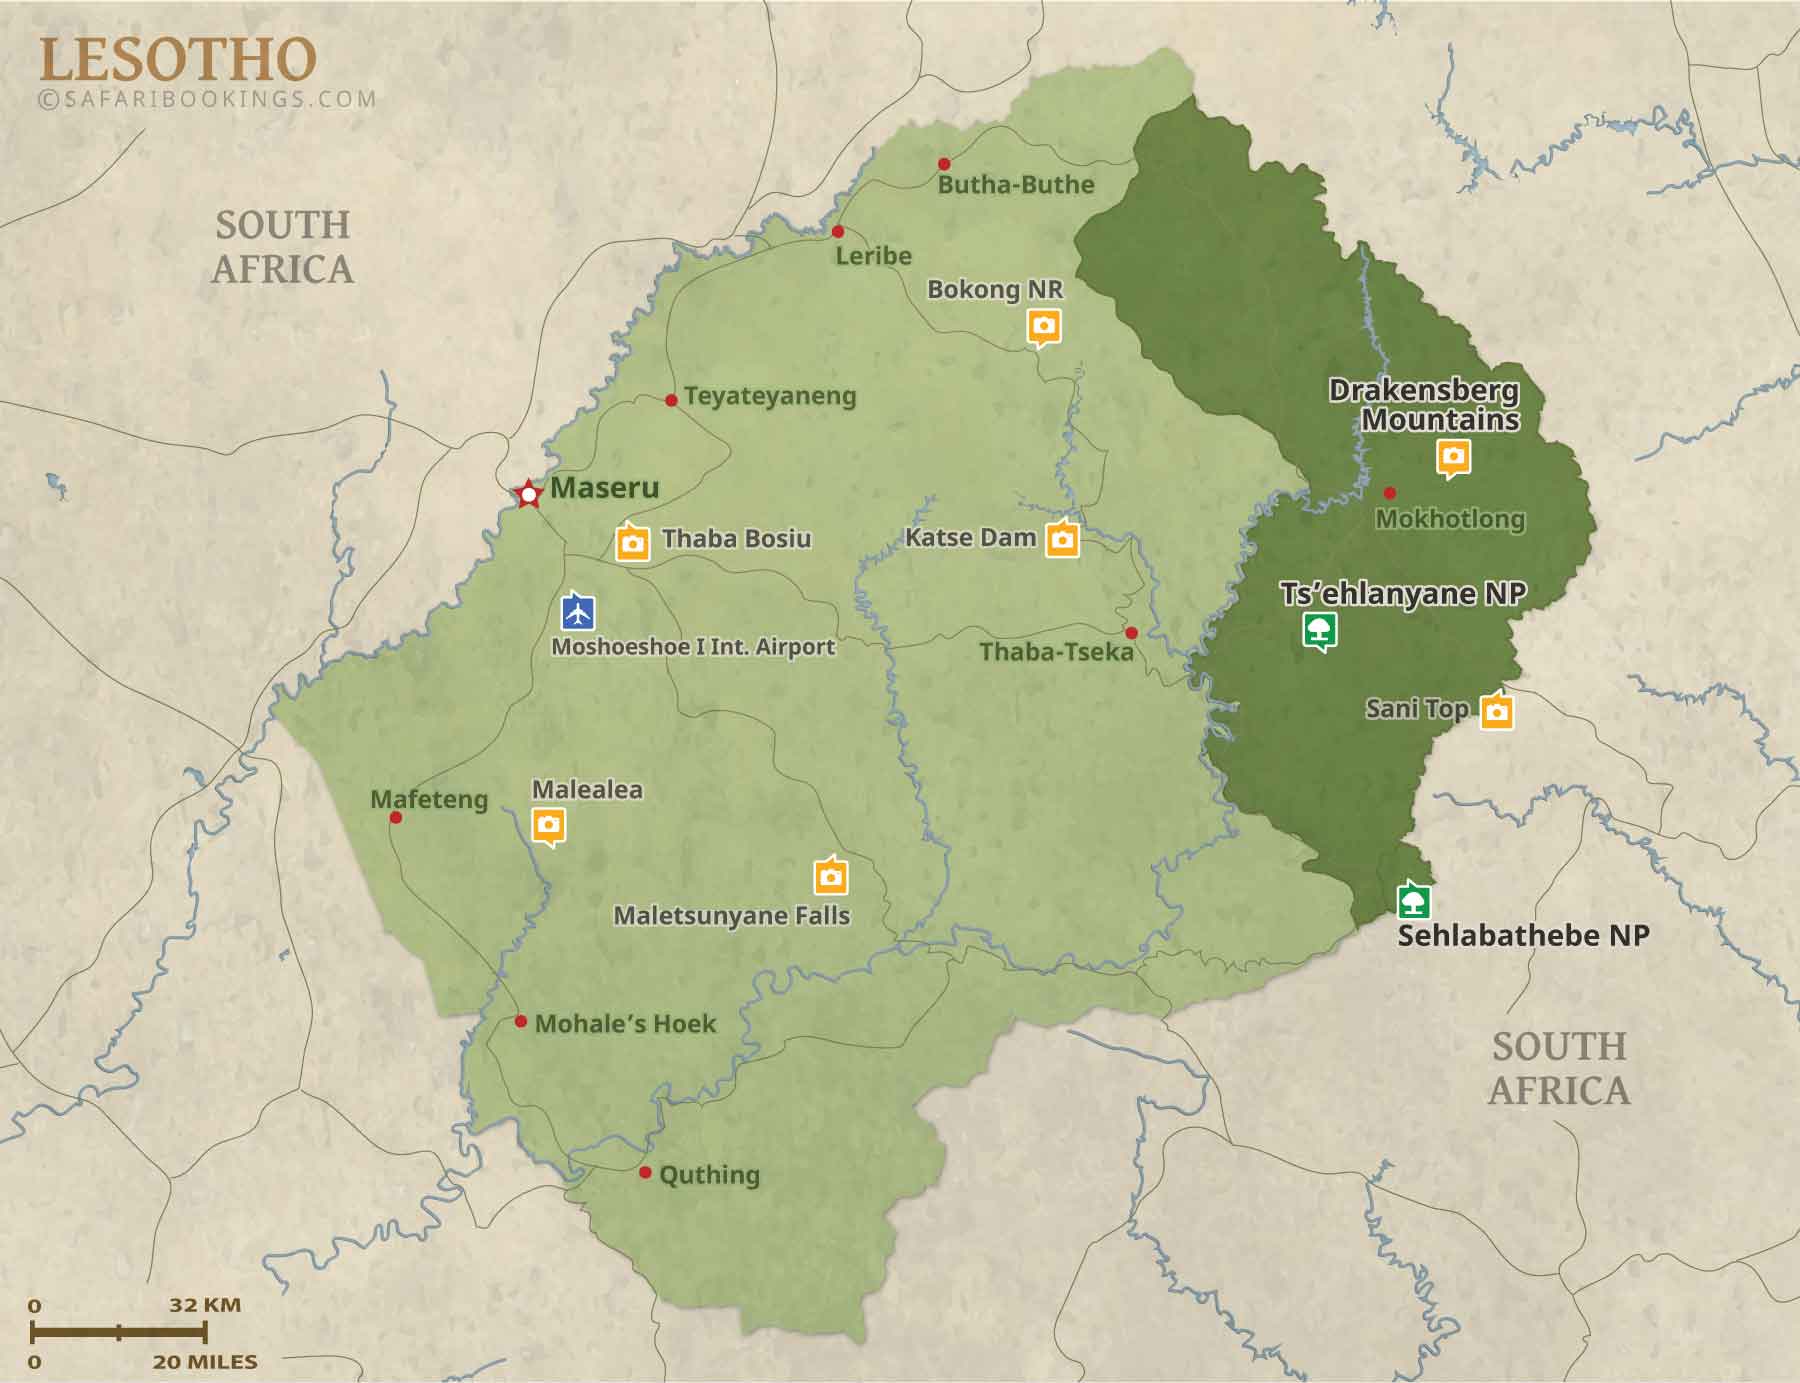 Popular Routes in Lesotho